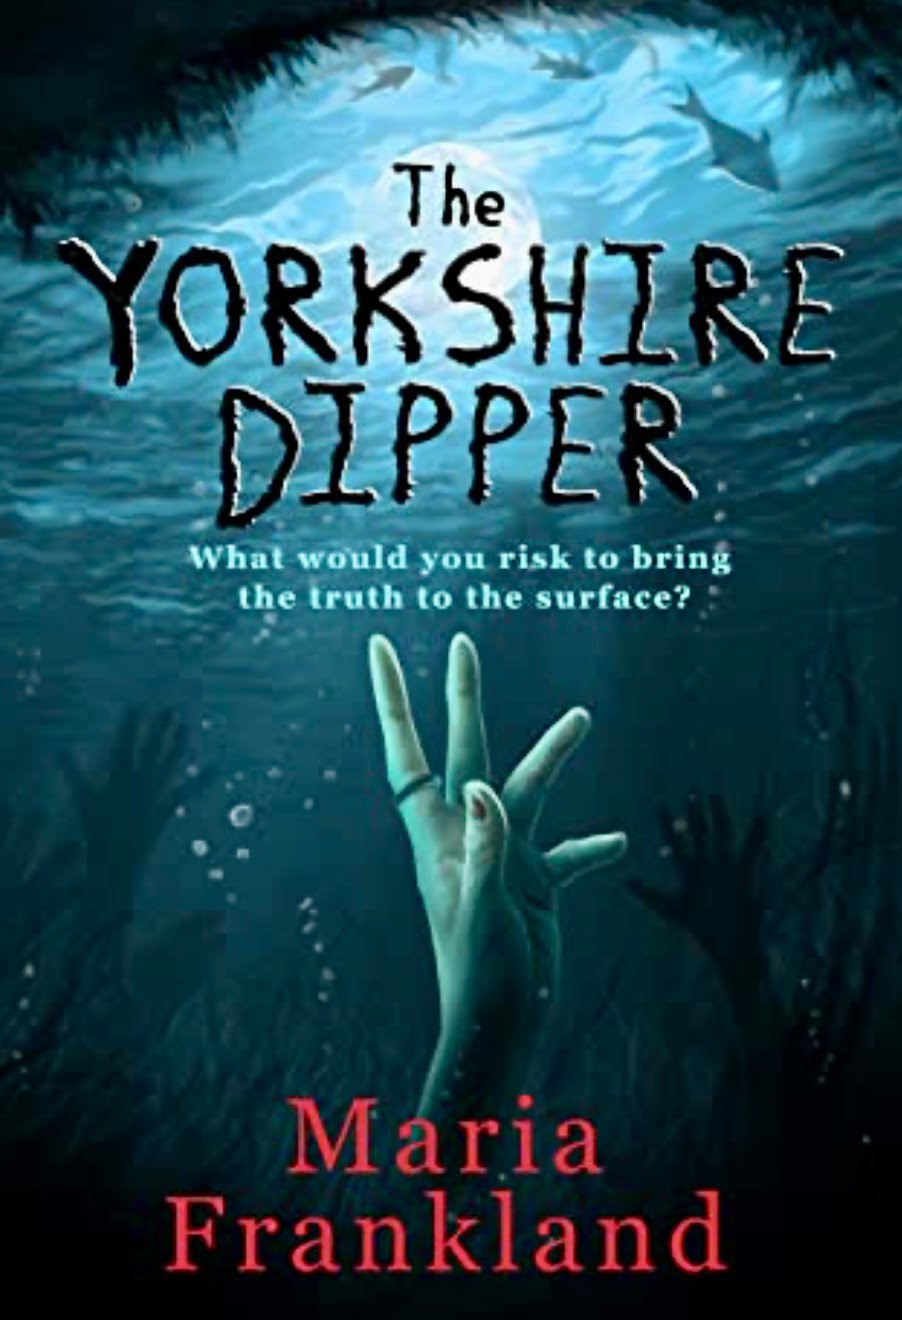 THE YORKSHIRE DIPPER BY MARIA FRANKLAND – BOOK REVIEW